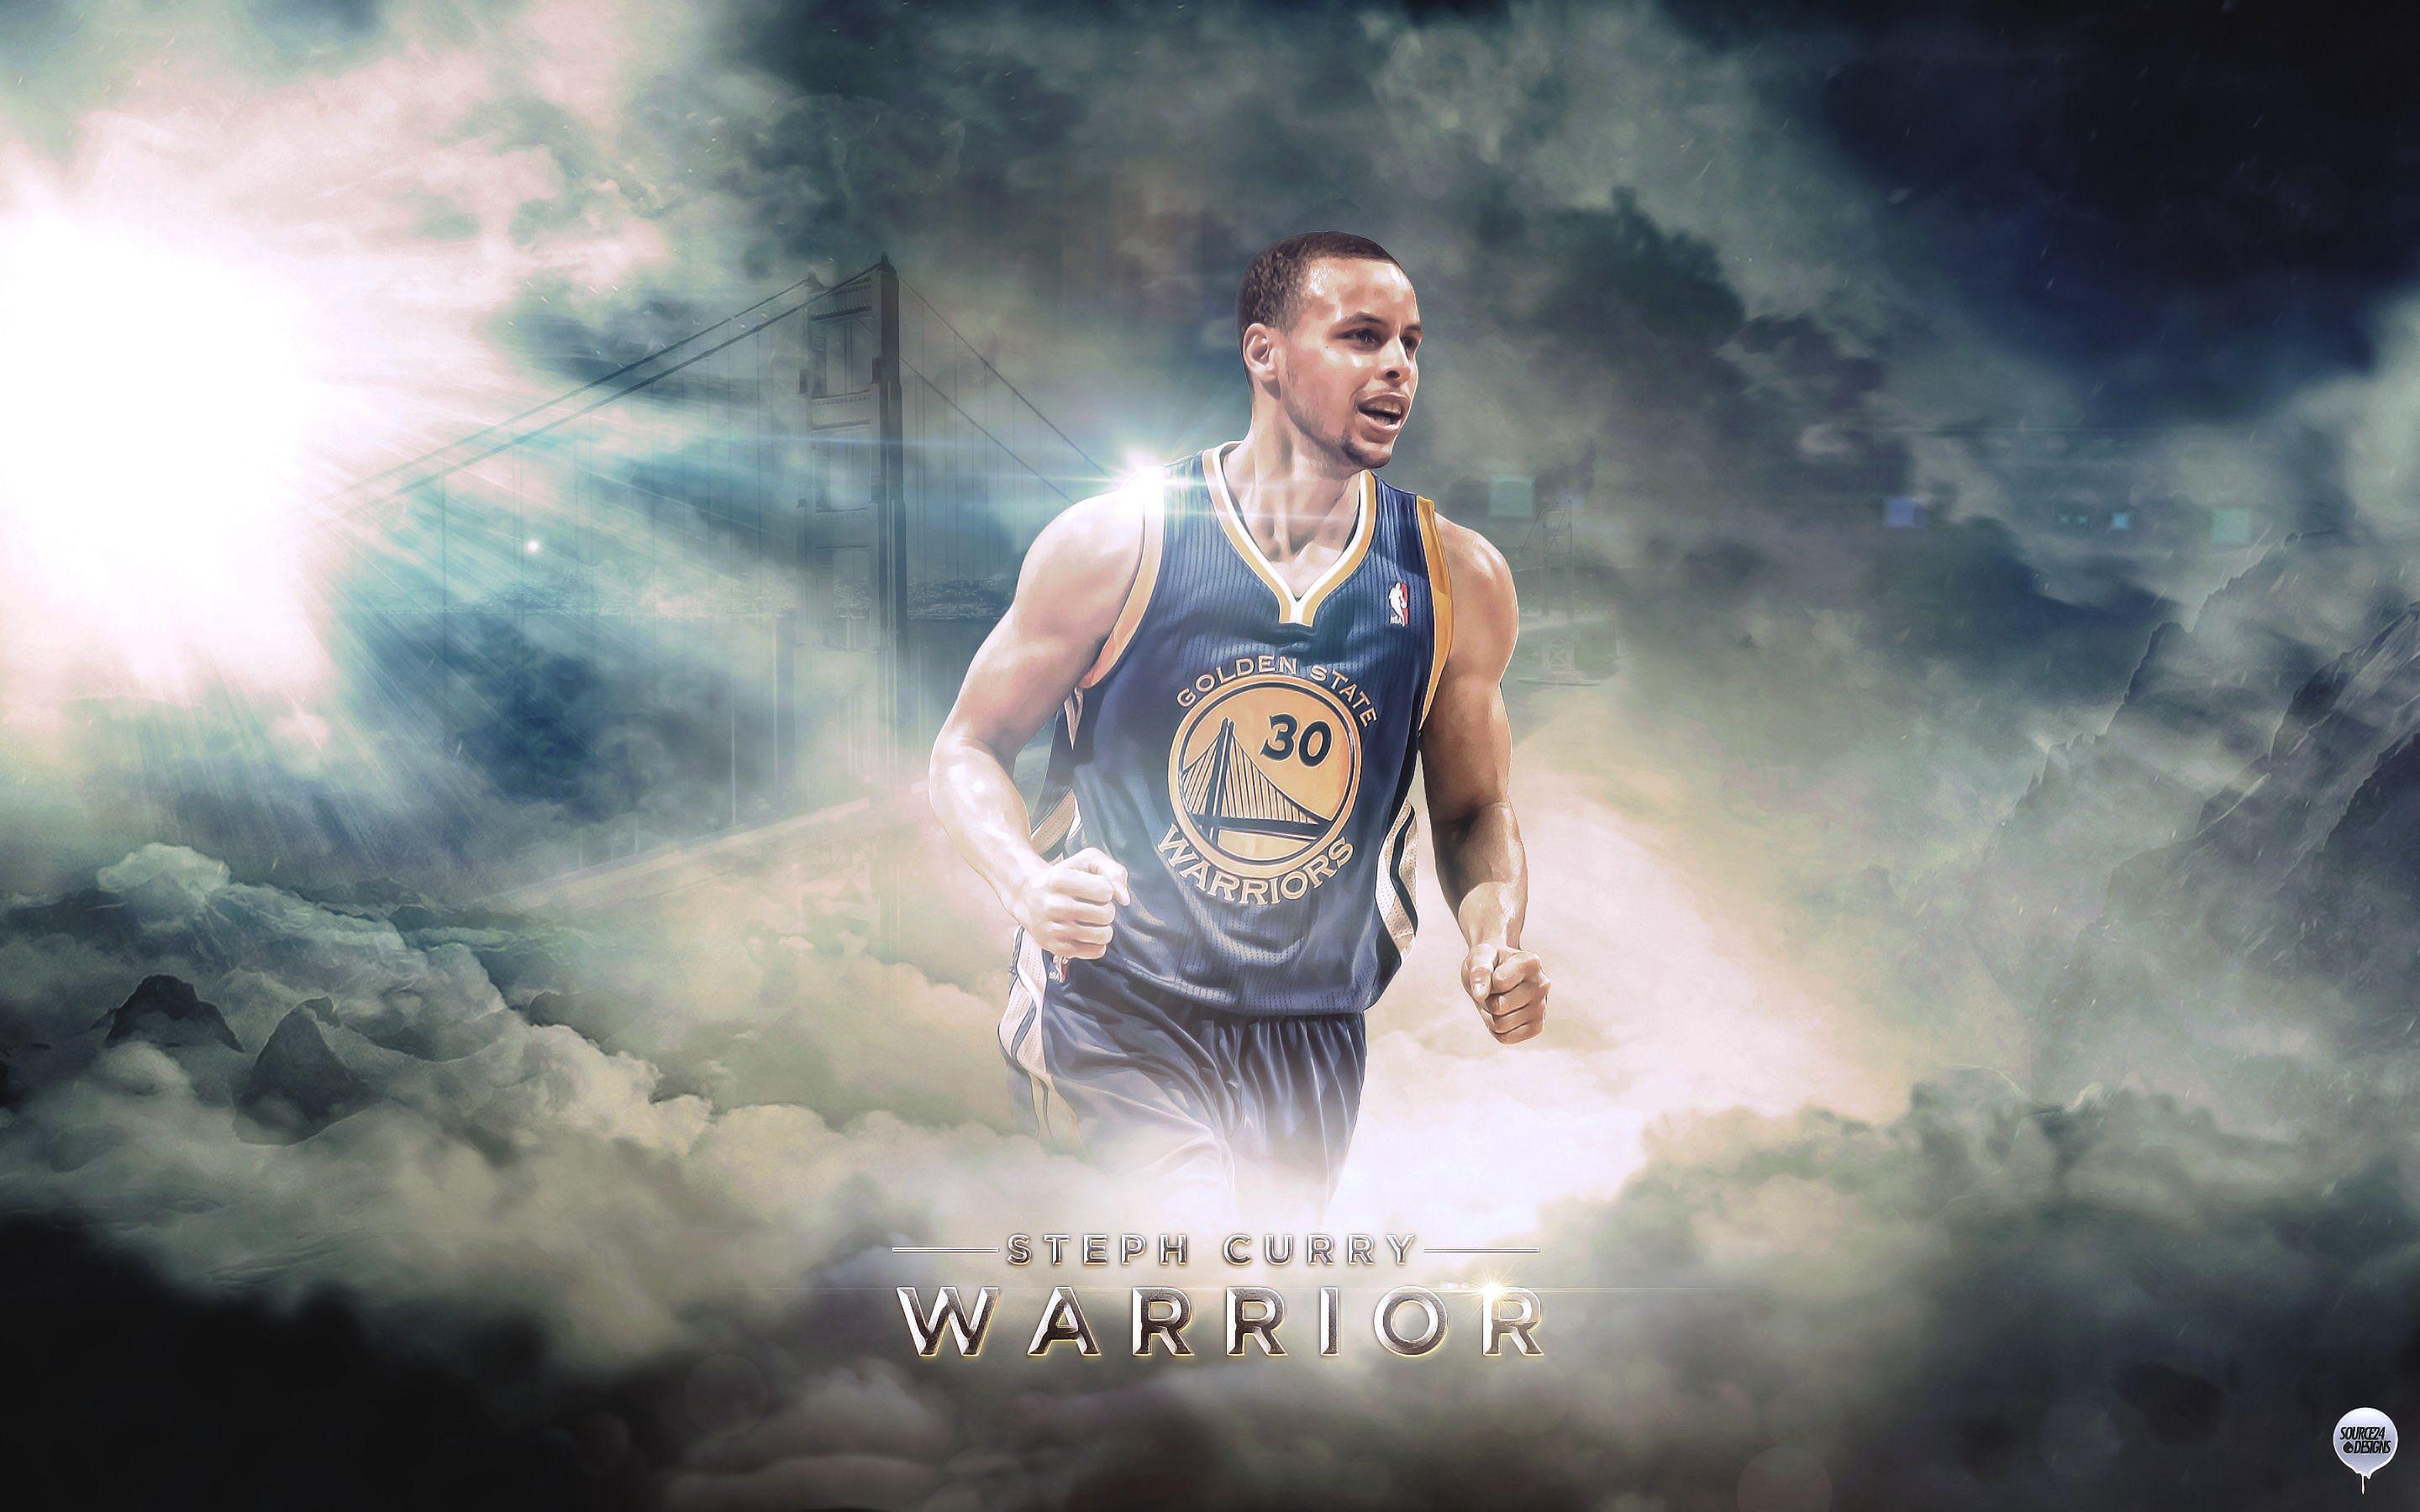 image about Stephen Curry. Stephen curry